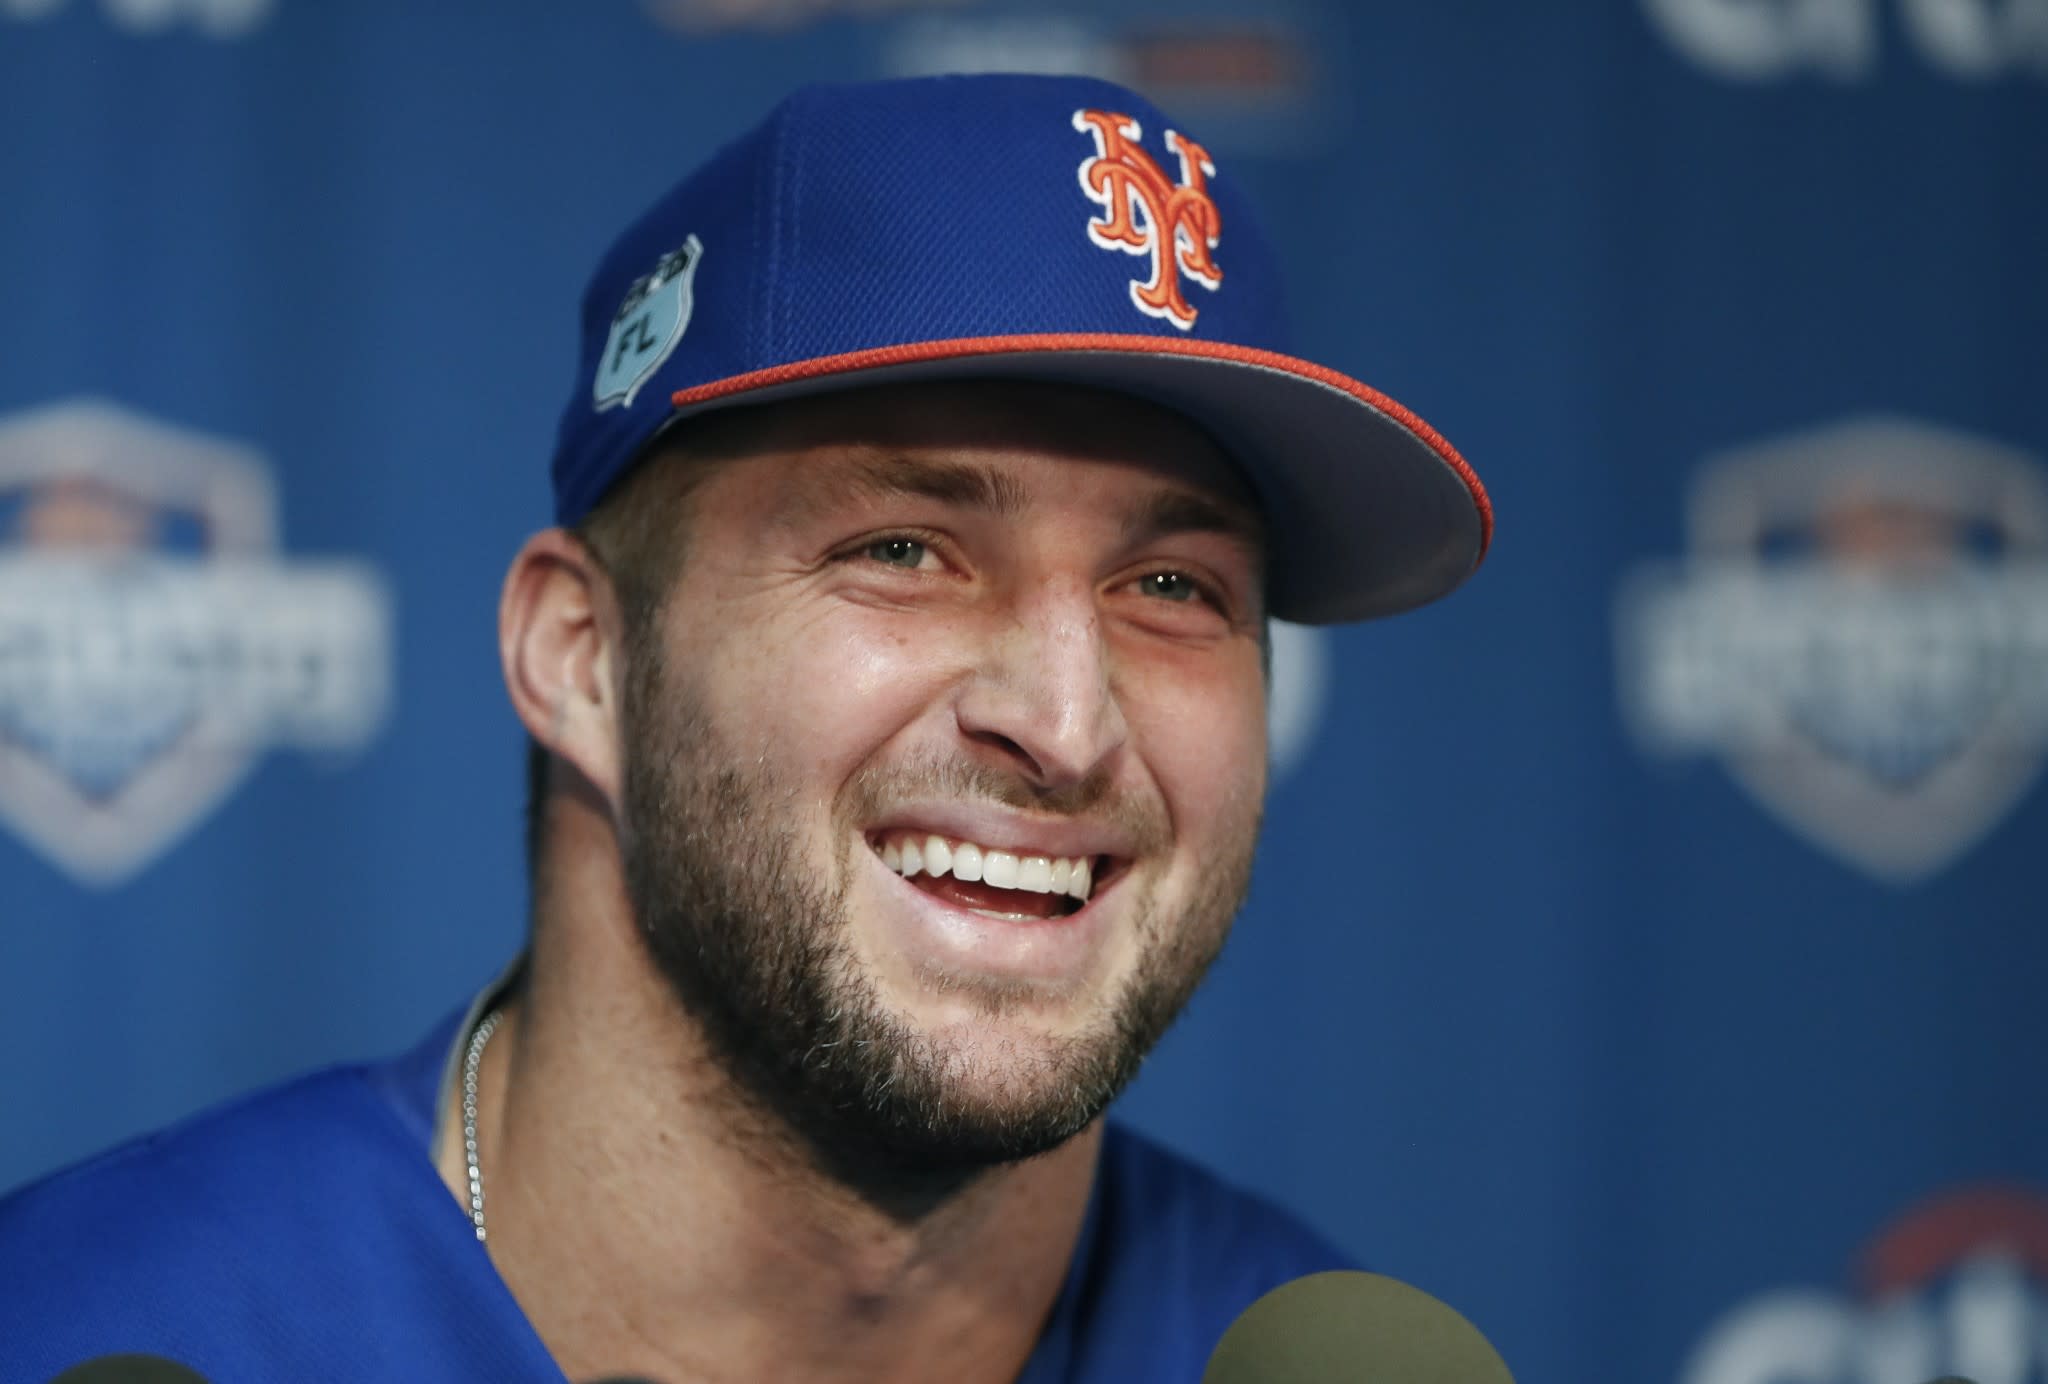 Tim Tebow homers in first official minor-league at-bat2048 x 1384